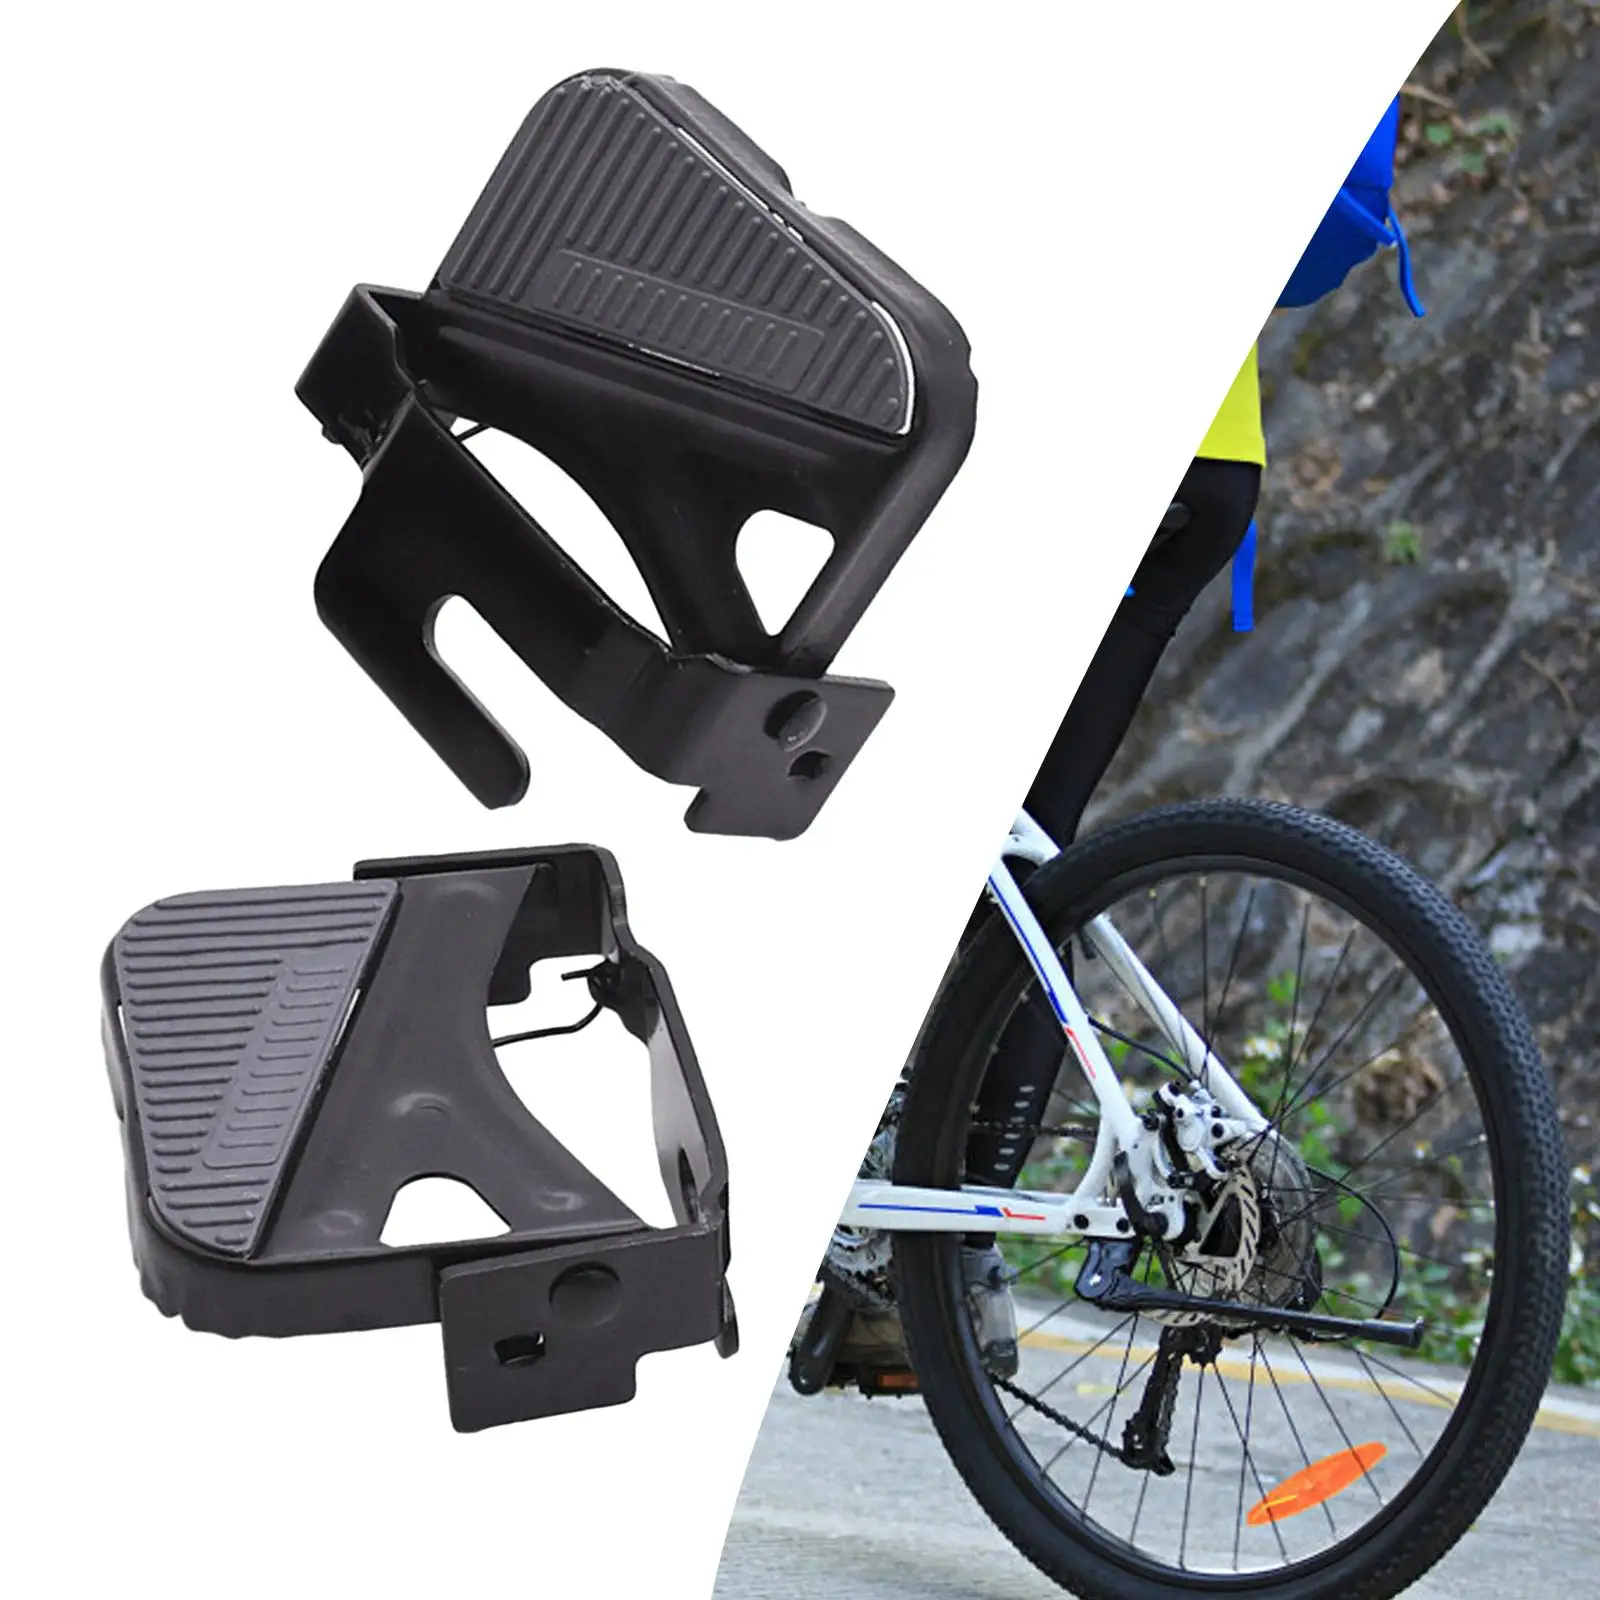 1 Pair Bike Rear Pedal, Folding Footrests Step Stool Bicycle Foot Pegs, Cycling Pedals for Mountain Bike BMX Electric Bicycle